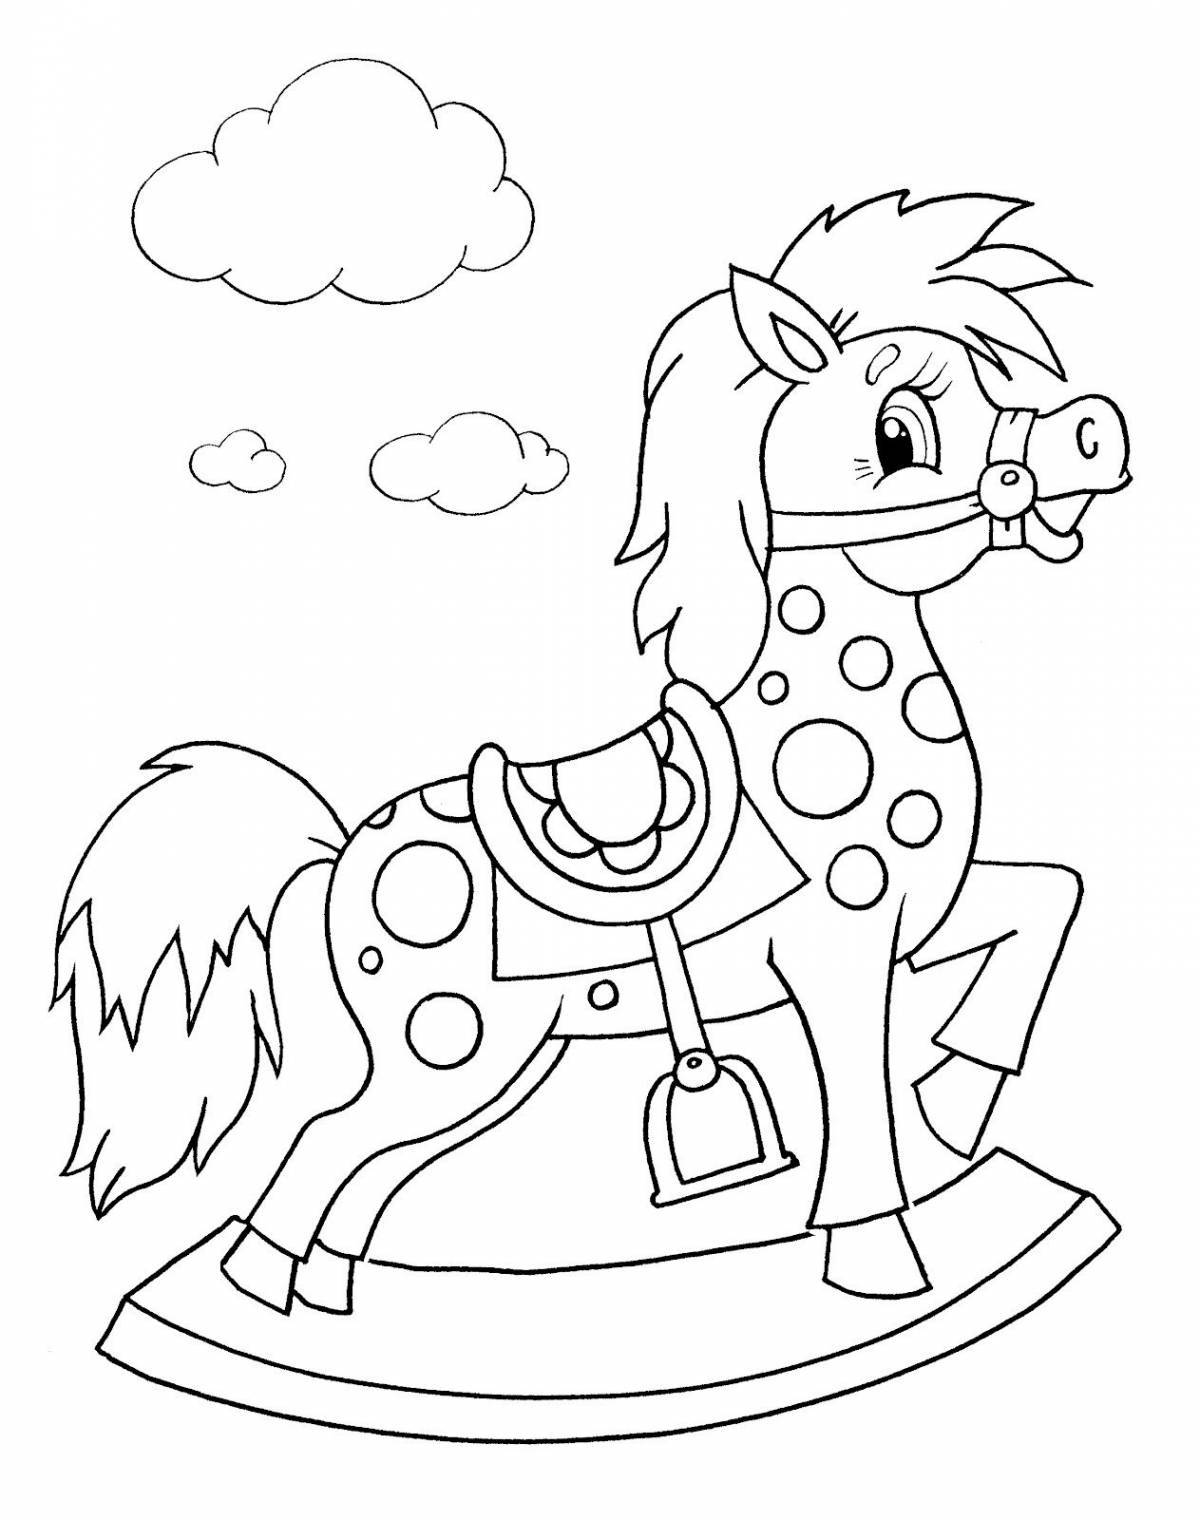 Fun coloring book for kids 5-6 years old